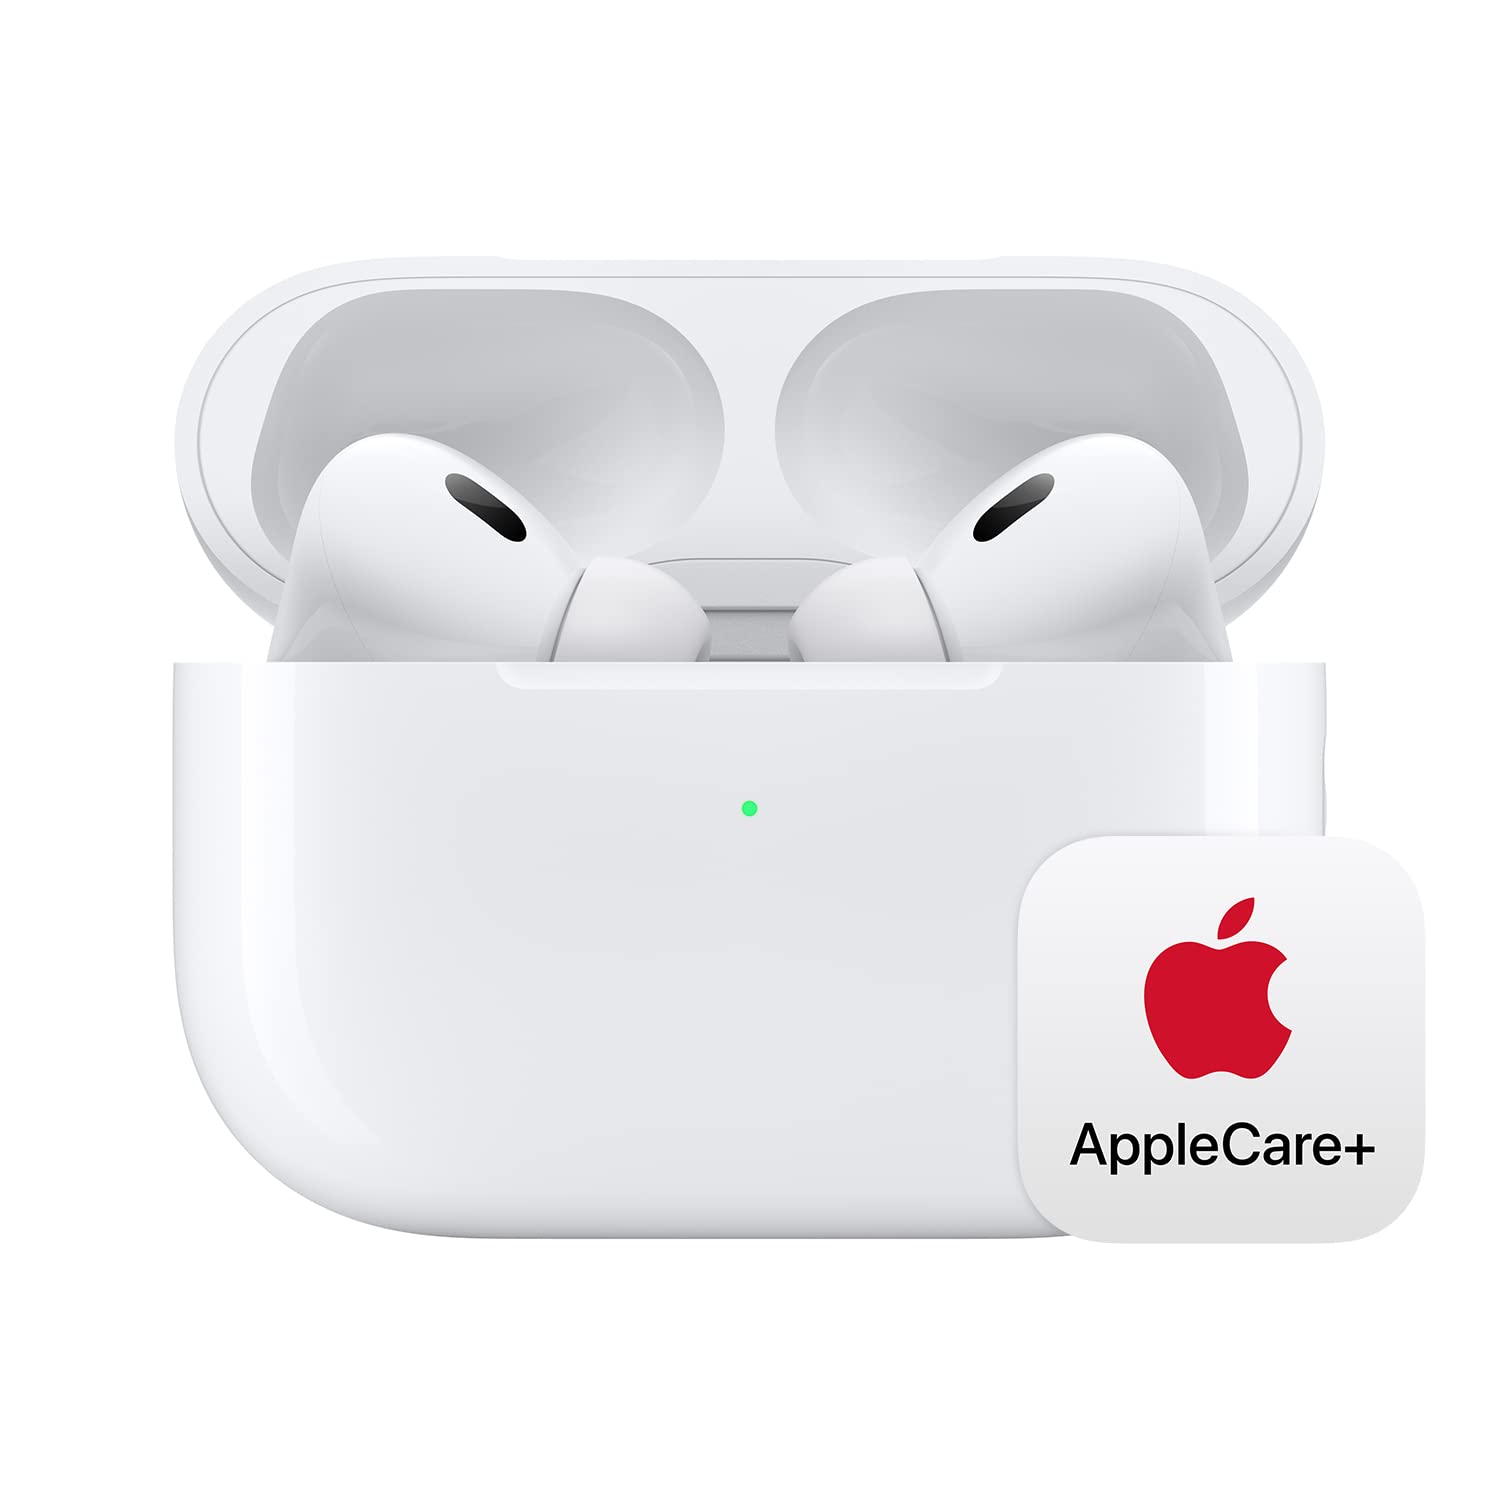 Apple AirPods Pro (第 2 世代) Care+ 付き (2 年間)